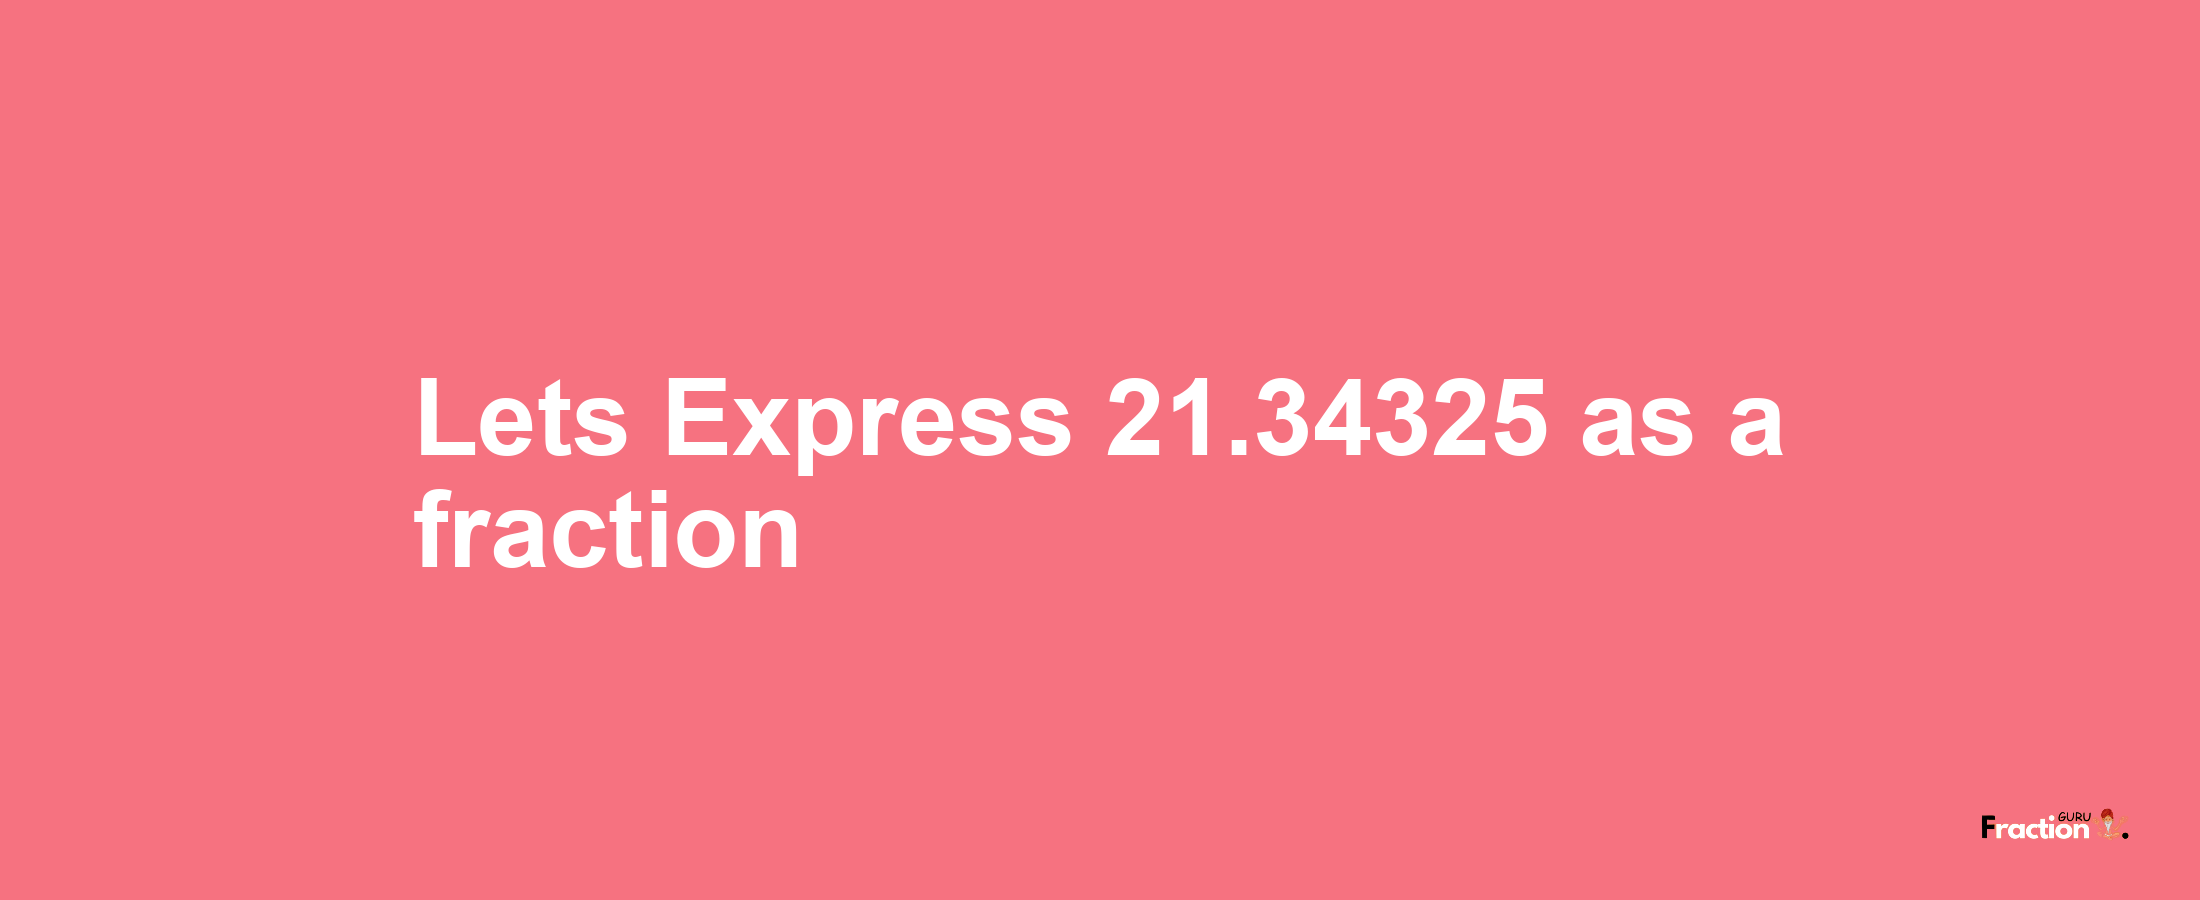 Lets Express 21.34325 as afraction